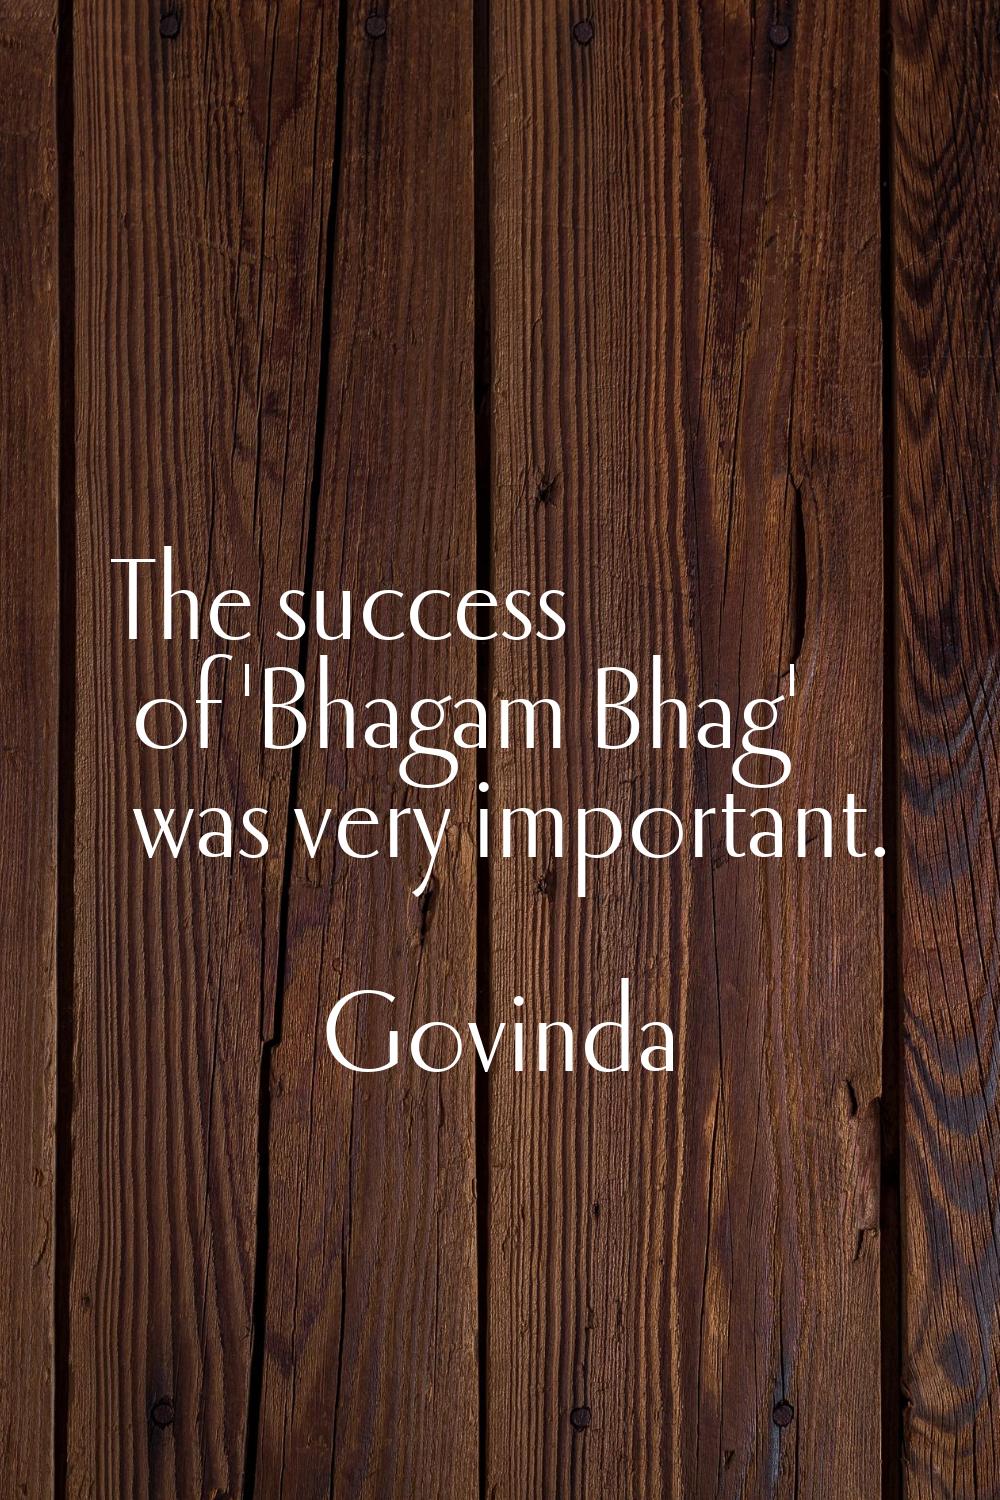 The success of 'Bhagam Bhag' was very important.